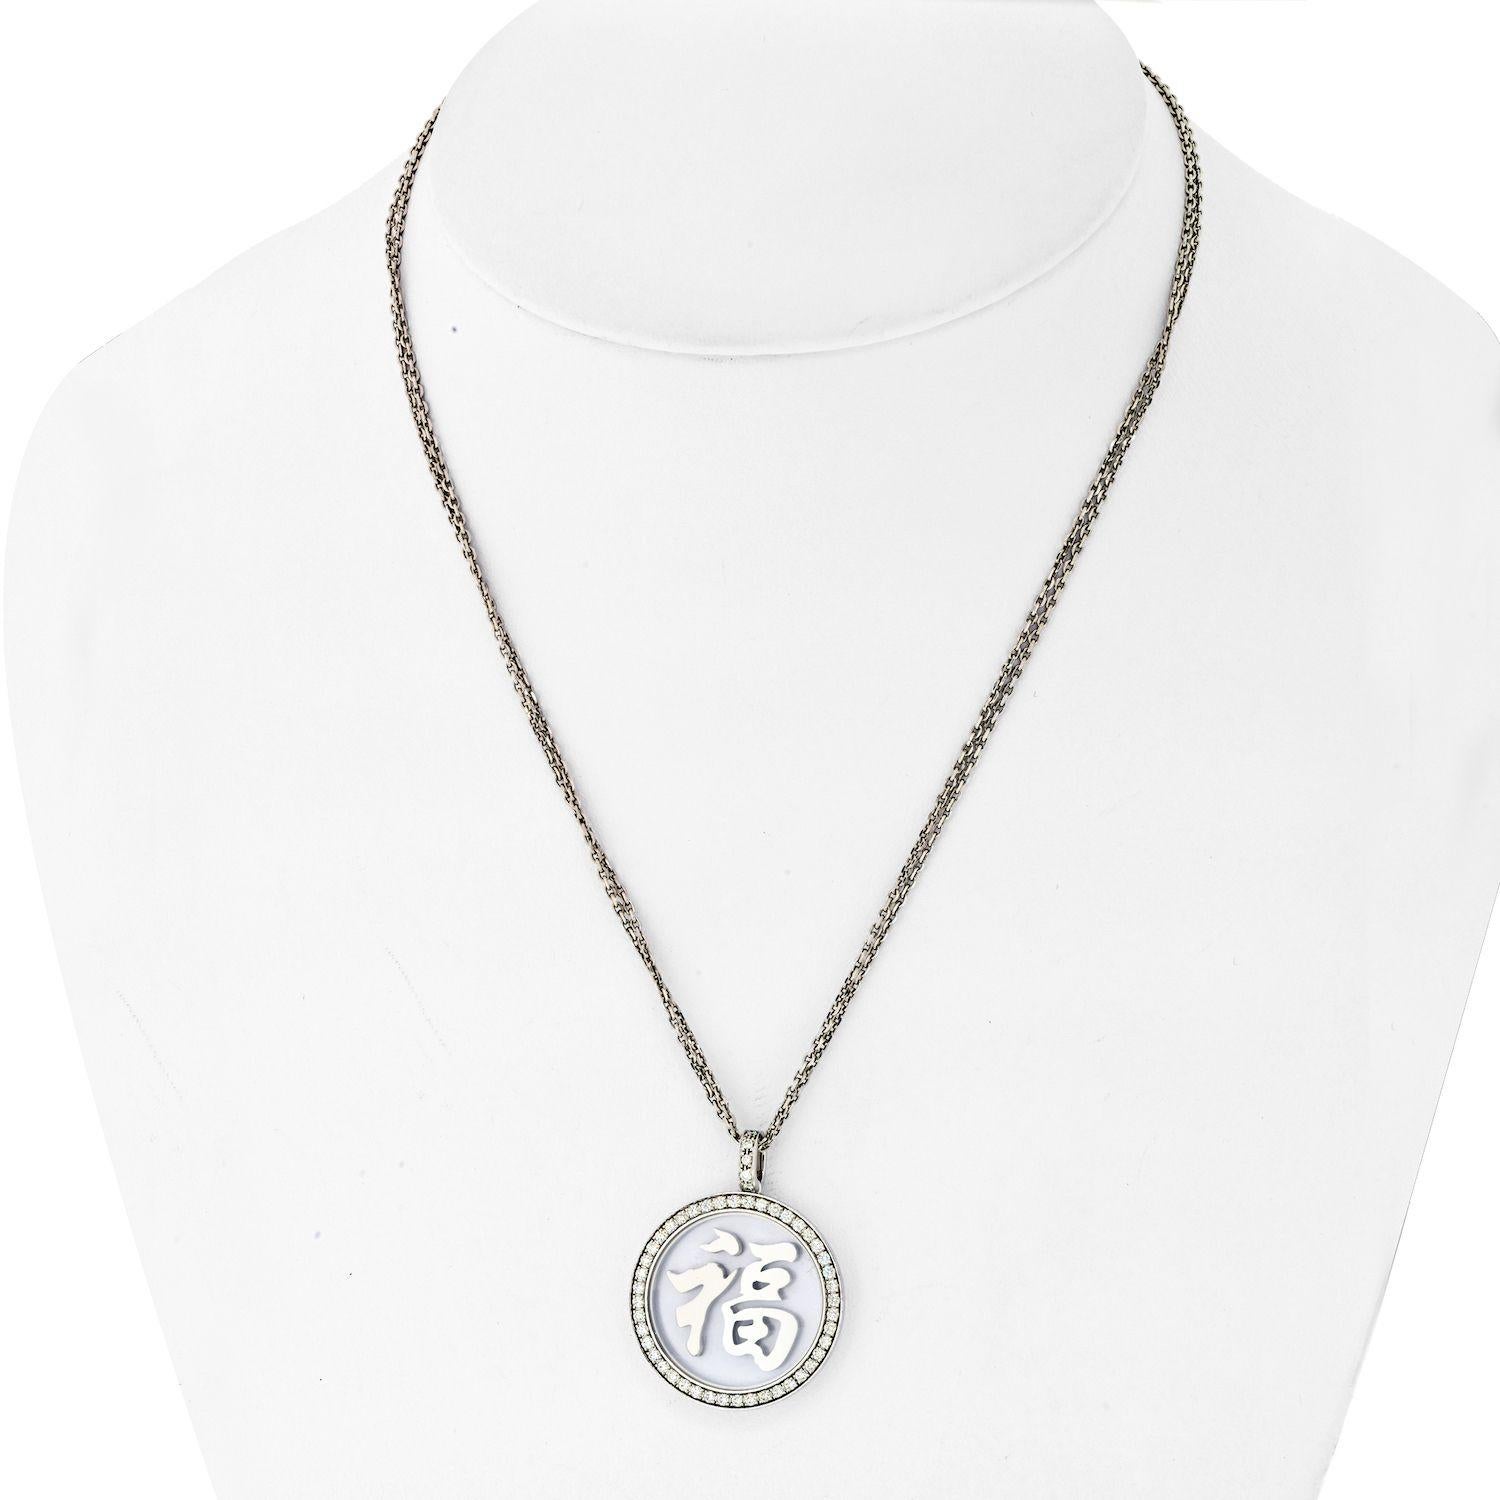 This Contemporary Chopard 18k White Gold Pendant Necklace Features 2 White Gold Chains Holding A Chinese Character Symbolizing Good Fortune.
Surrounded By Diamonds (0.67ct Twd). 
The Decoration Size Is 27x27mm. 
The Length Is 16.5 Inches. 
The Total